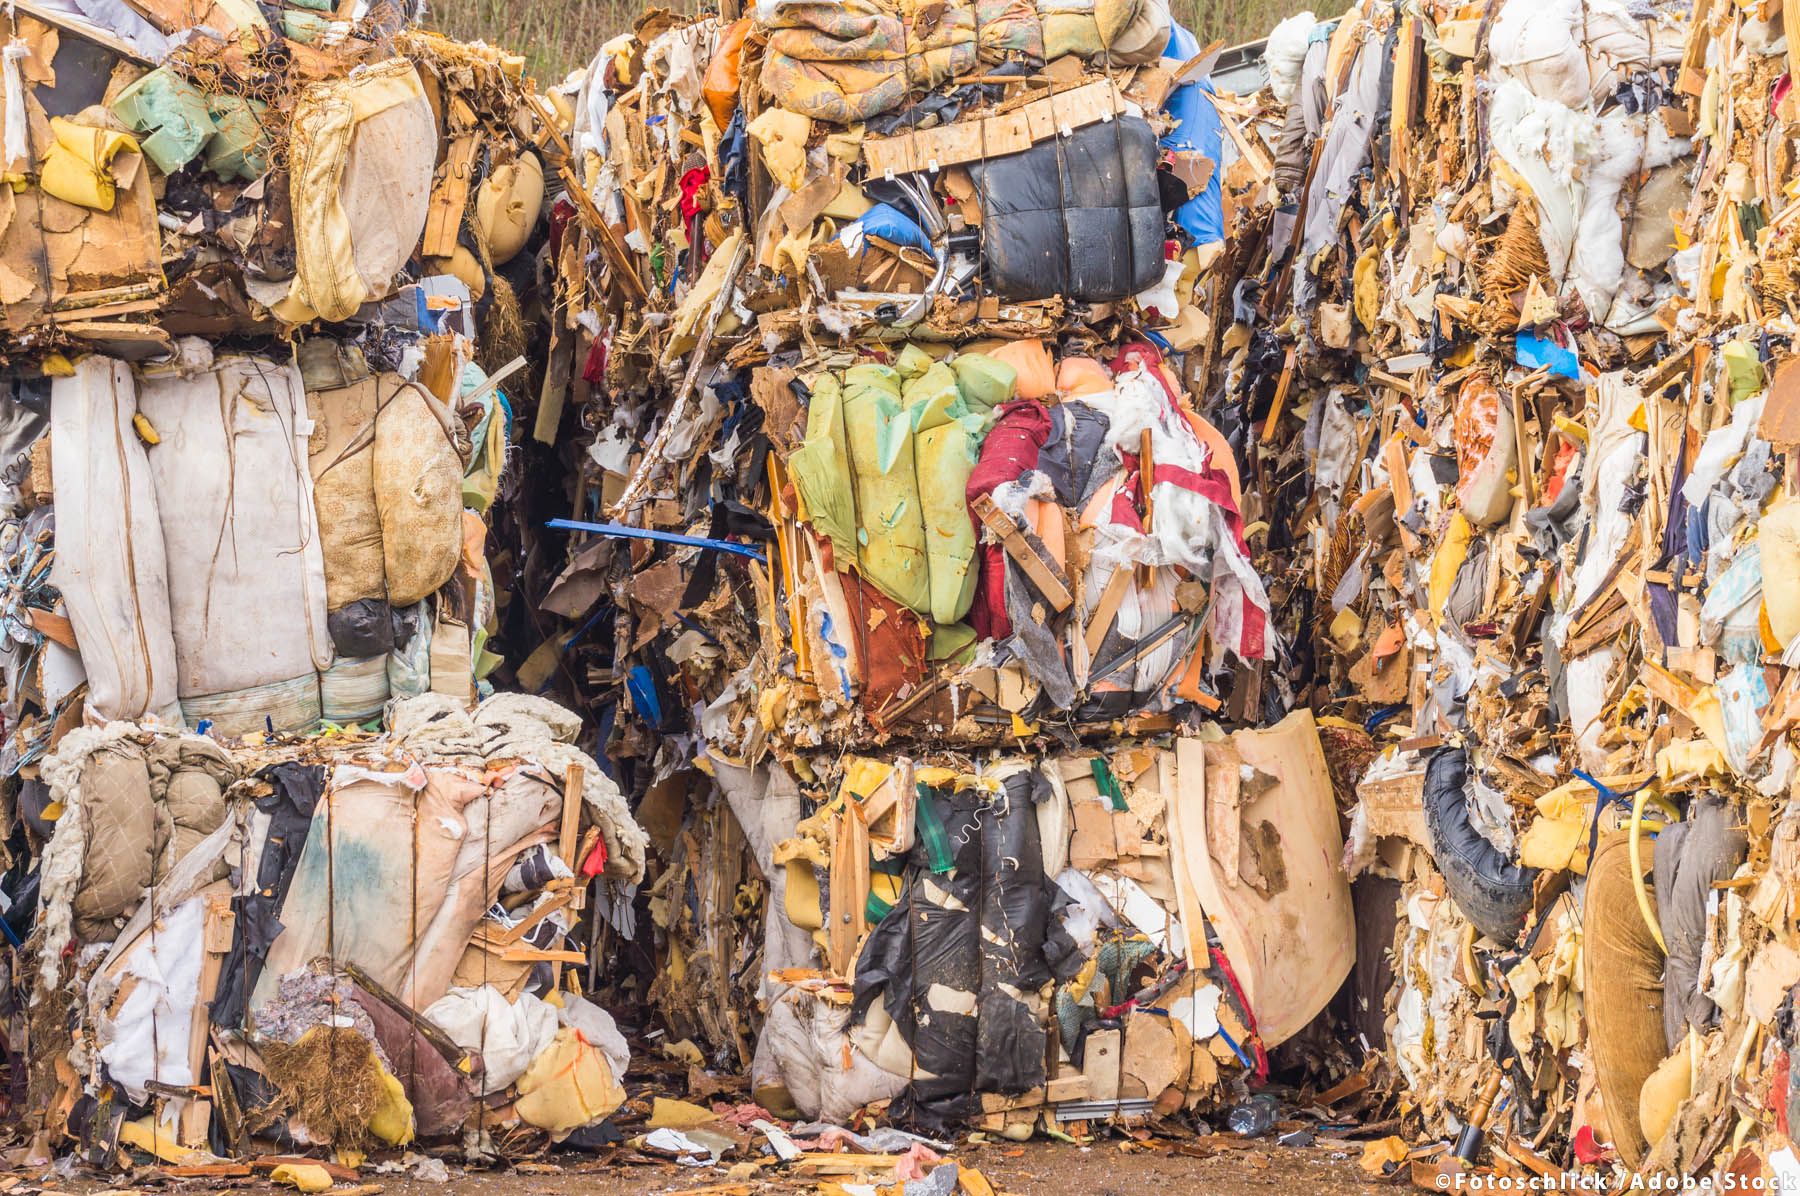 Circular economy: MEPs call for tighter EU consumption and recycling rules